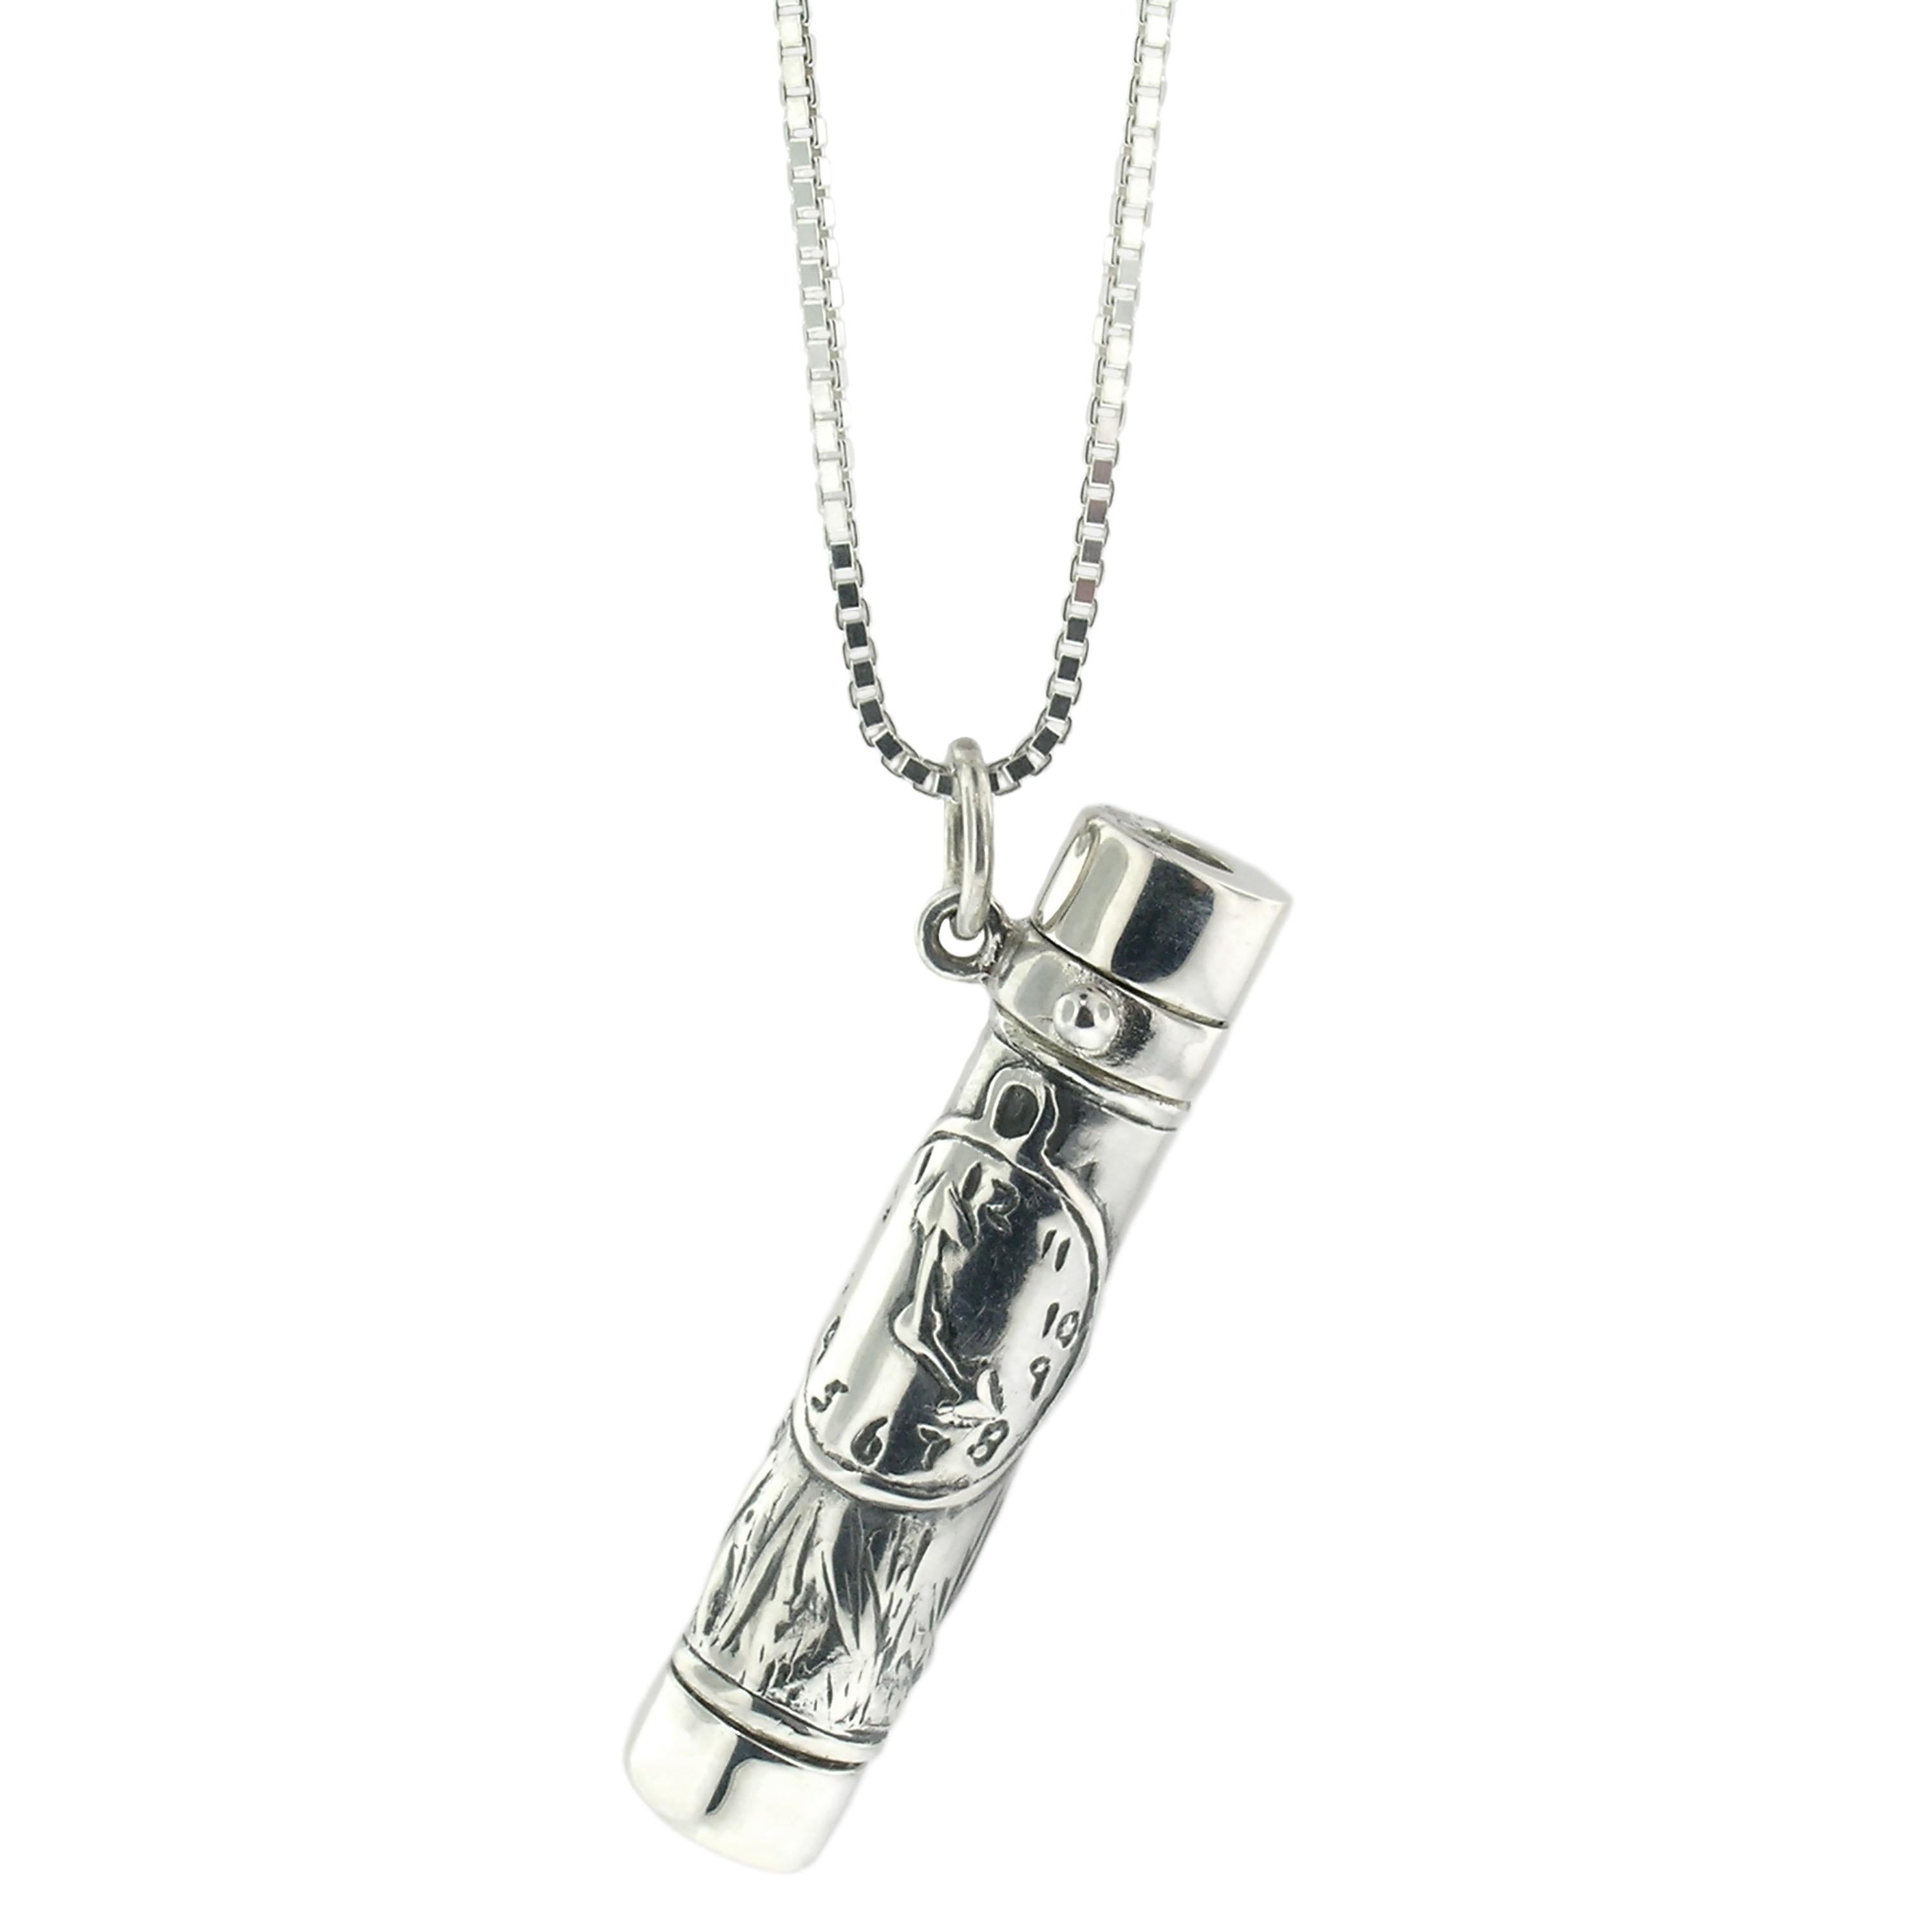 This kaleidoscope necklace features a rabbit and a clock, in a definite nod to the White Rabbit of 